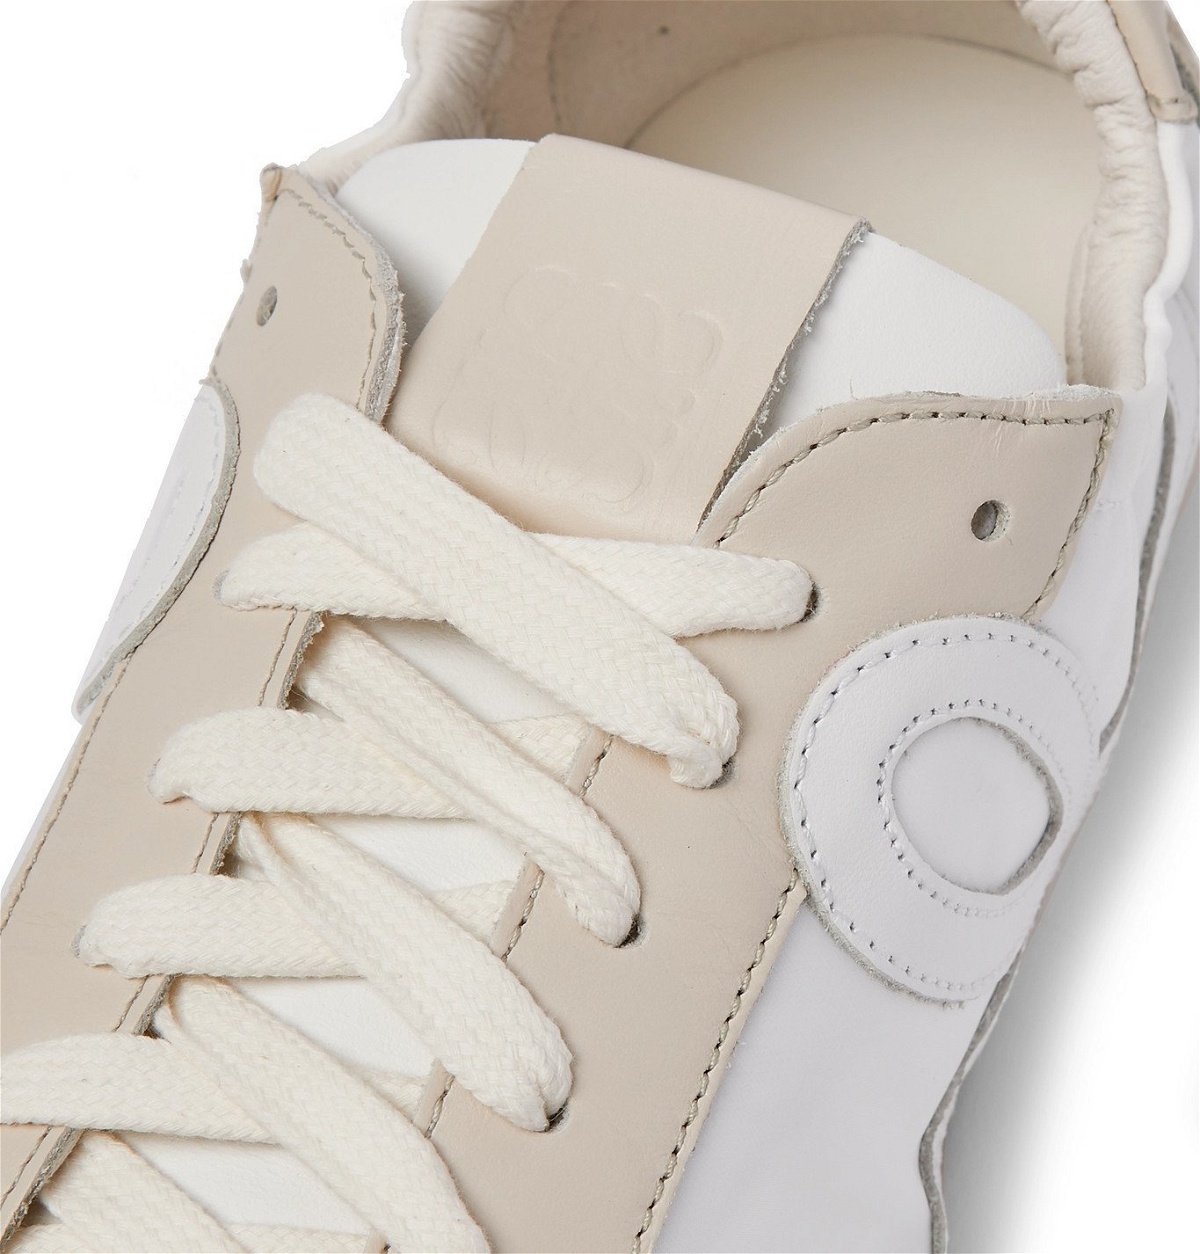 Loewe - Ballet Leather and Suede-Trimmed Nylon Sneakers - White Loewe